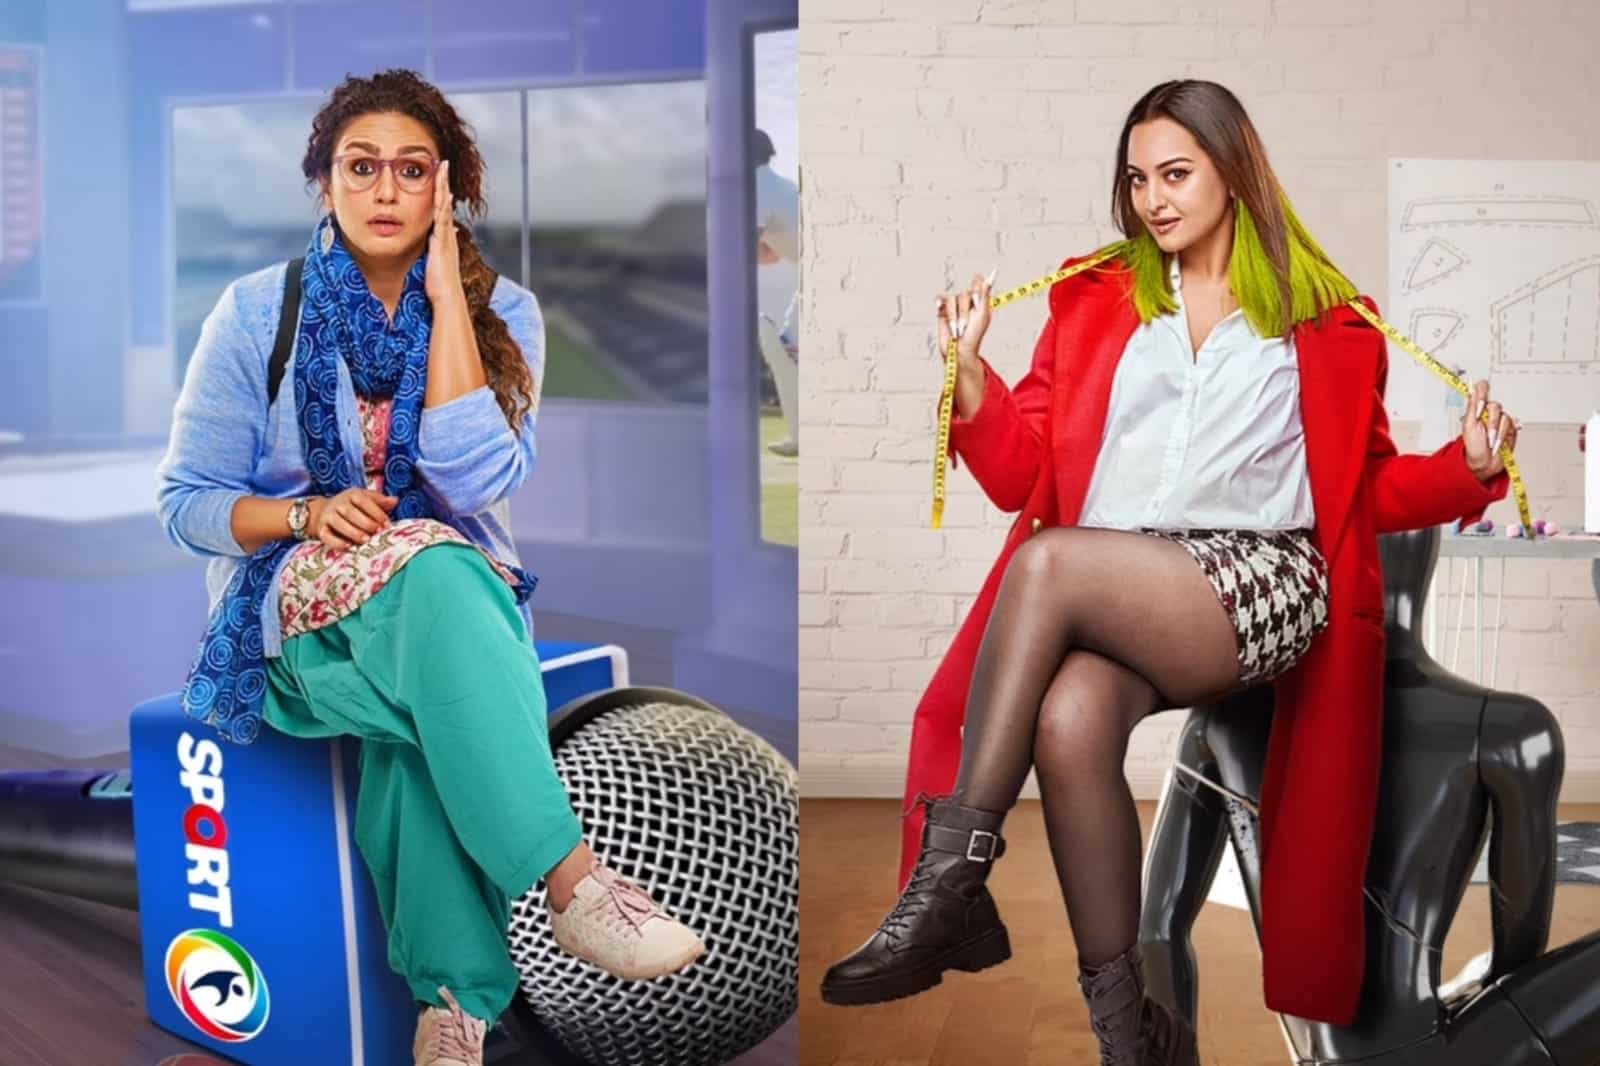 Double XL posters: Sonakshi Sinha, Huma Qureshi are women with big